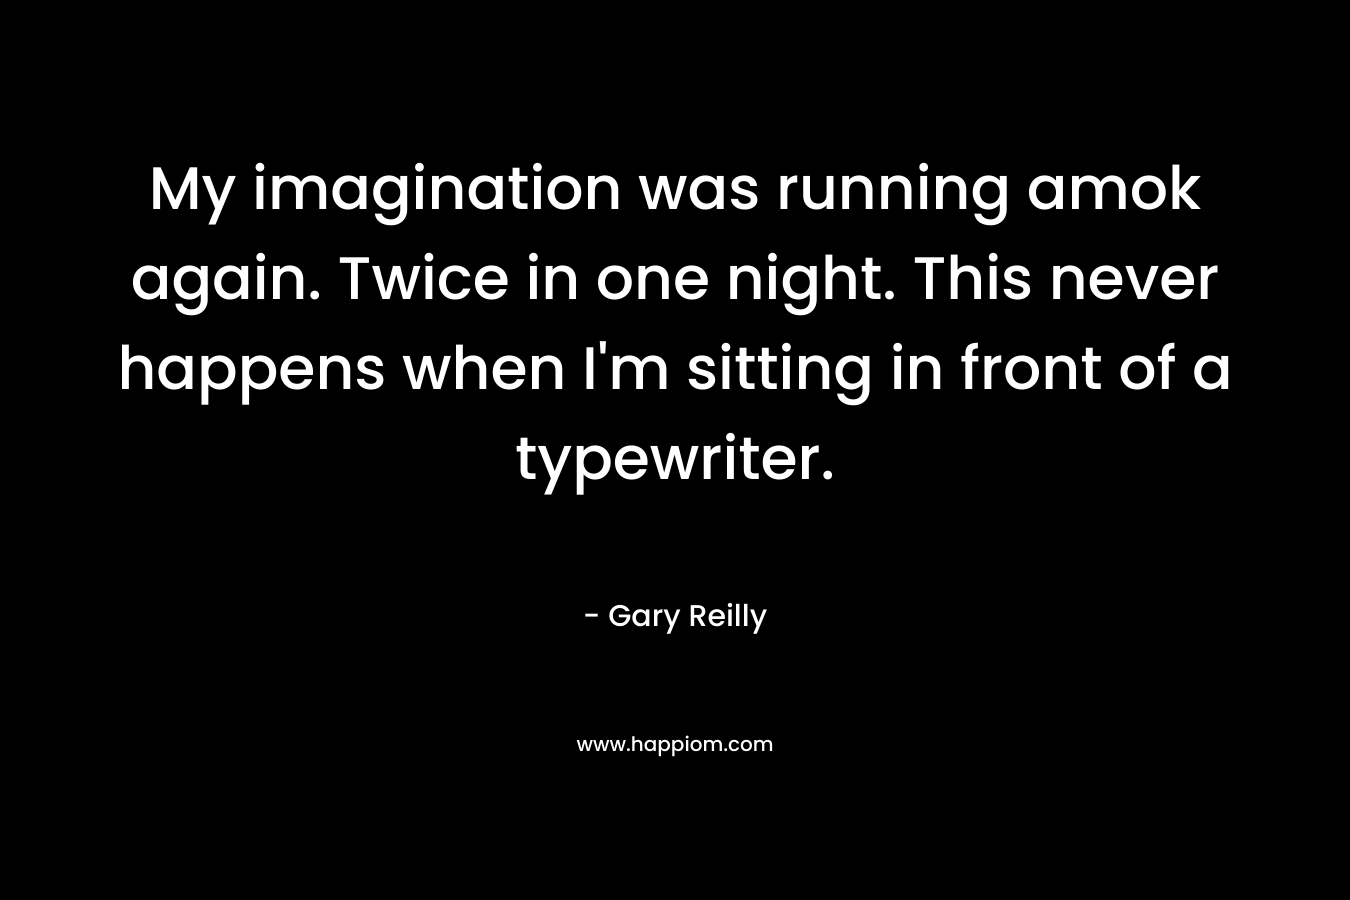 My imagination was running amok again. Twice in one night. This never happens when I’m sitting in front of a typewriter. – Gary Reilly